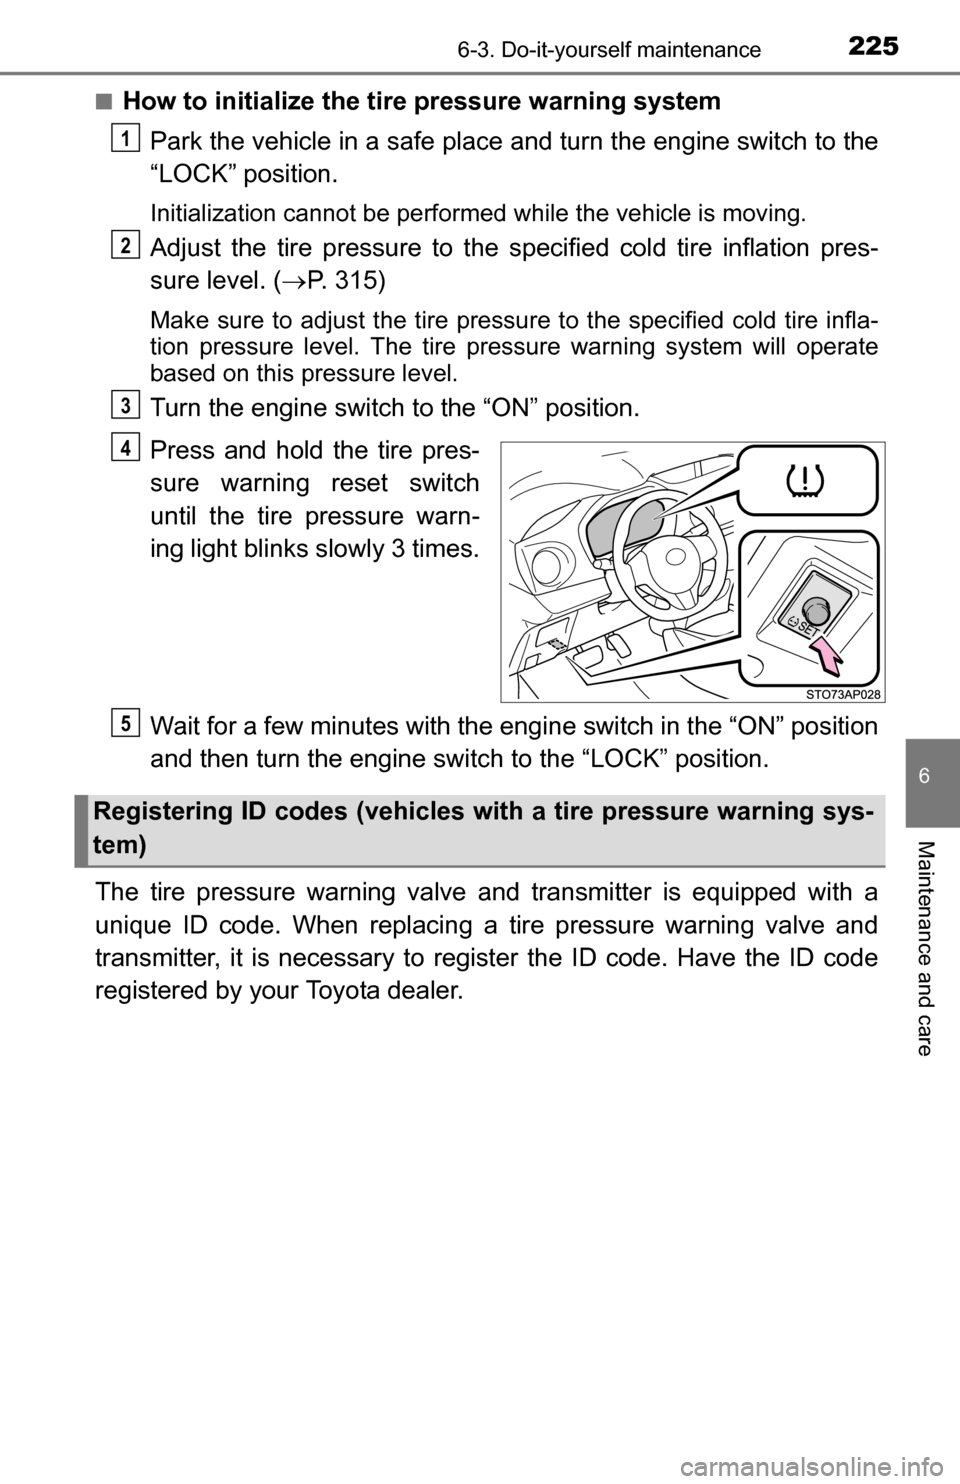 TOYOTA YARIS 2016 3.G Owners Manual 2256-3. Do-it-yourself maintenance
6
Maintenance and care
■How to initialize the tire pressure warning systemPark the vehicle in a safe place  and turn the engine switch to the
“LOCK” position.
